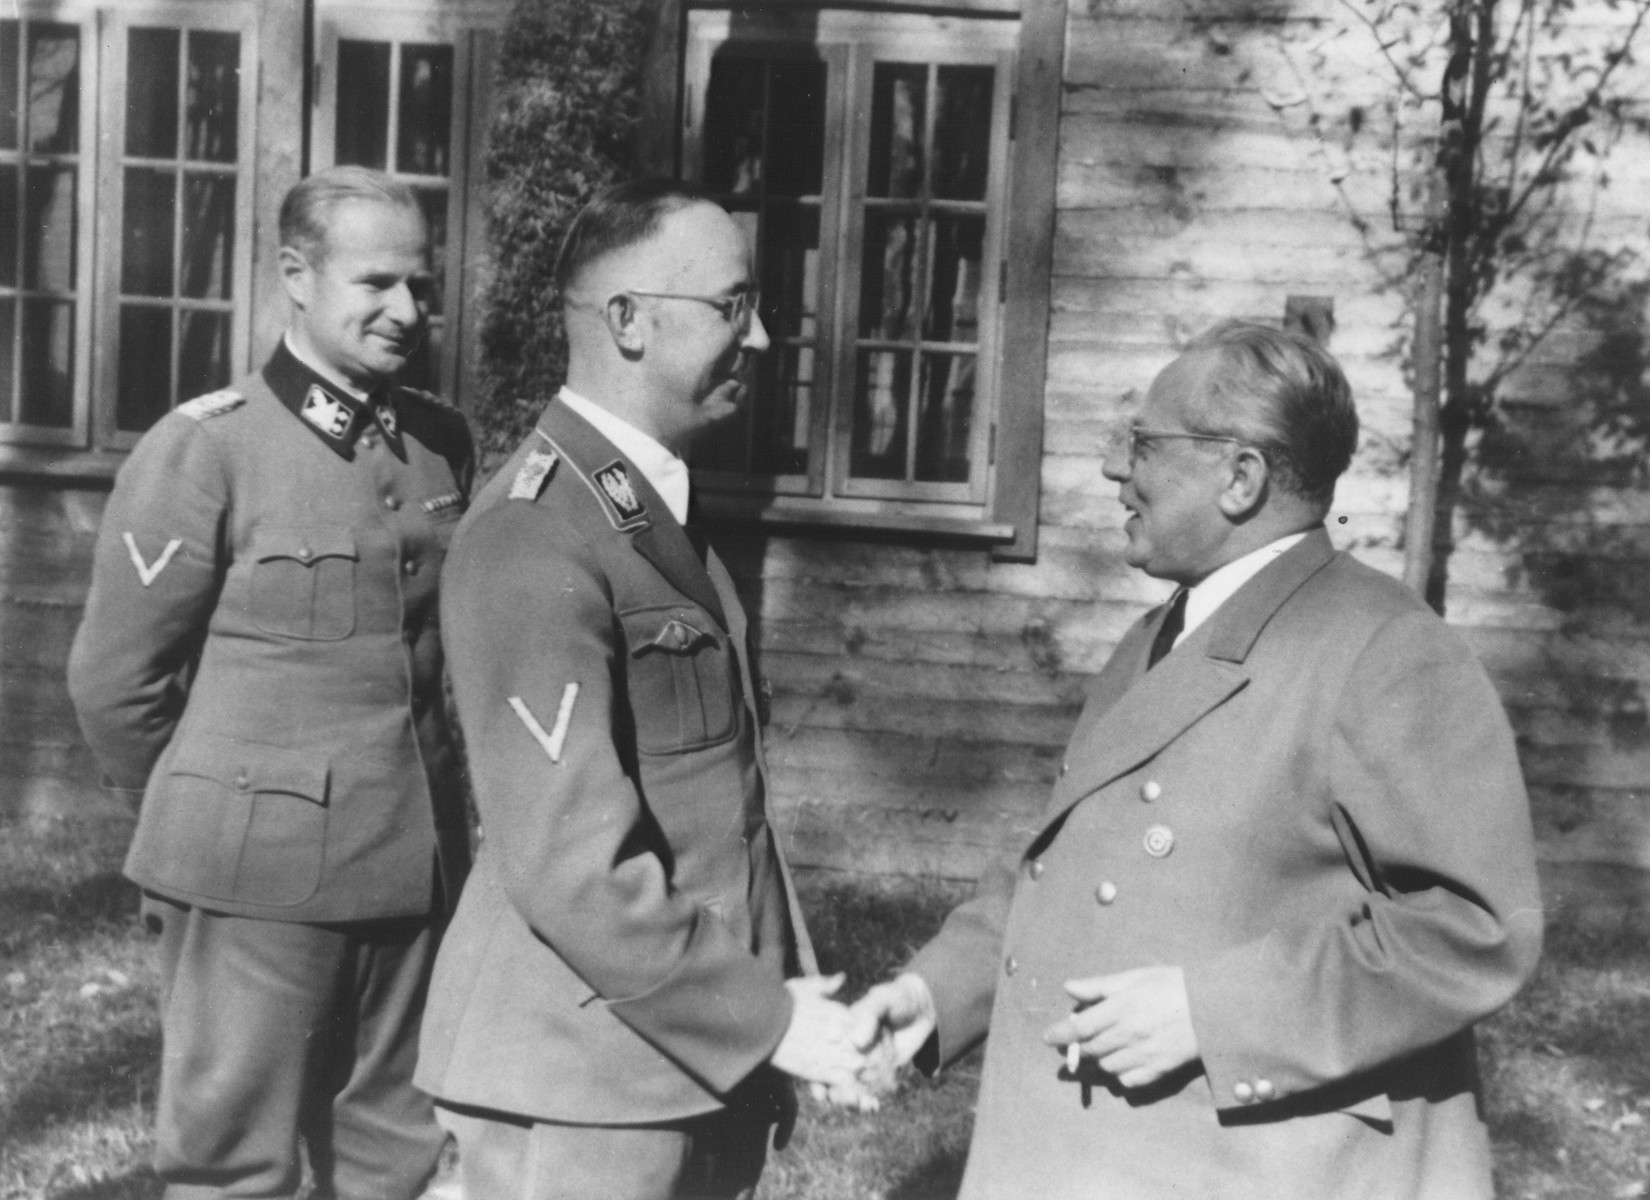 Reichsfuehrer-SS Heinrich Himmler shakes hands with photographer Heinrich Hoffmann outside a cabin.

Pictured from left to right are: Karl Wolff, Himmler and Heinrich Hoffmann.